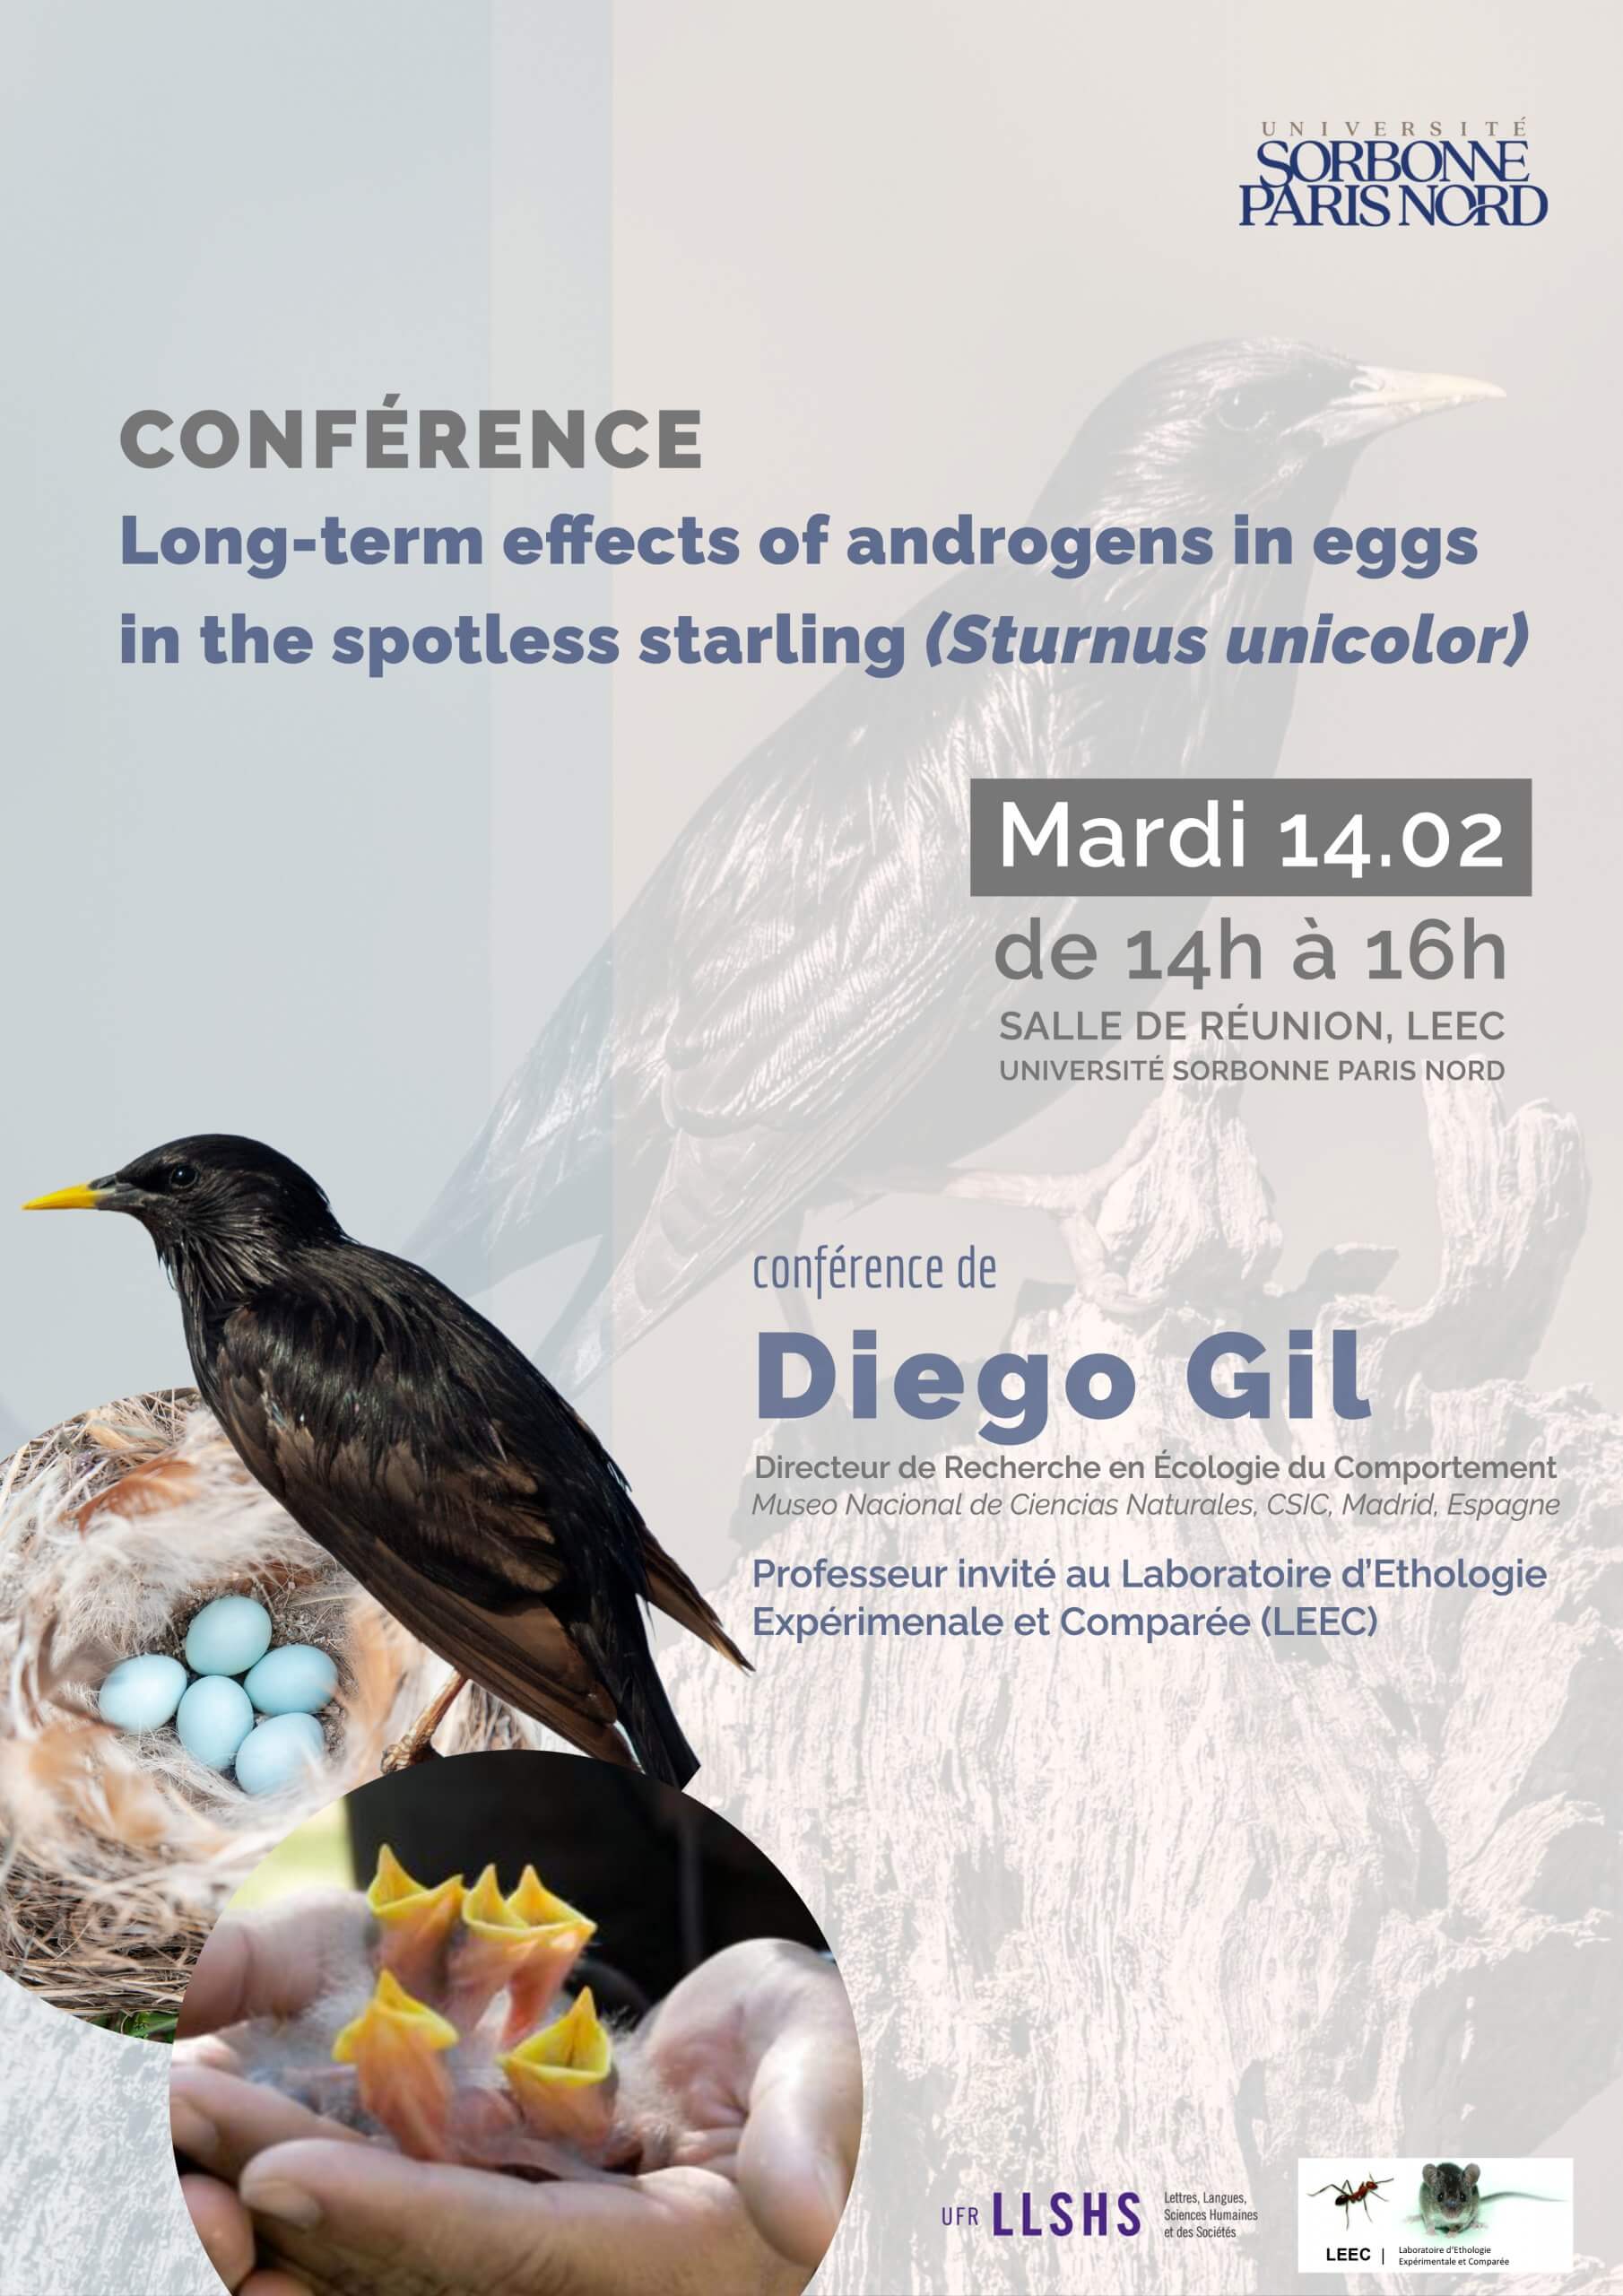 Long-term effects of androgens in eggs in the spotless starling - Diego Gill